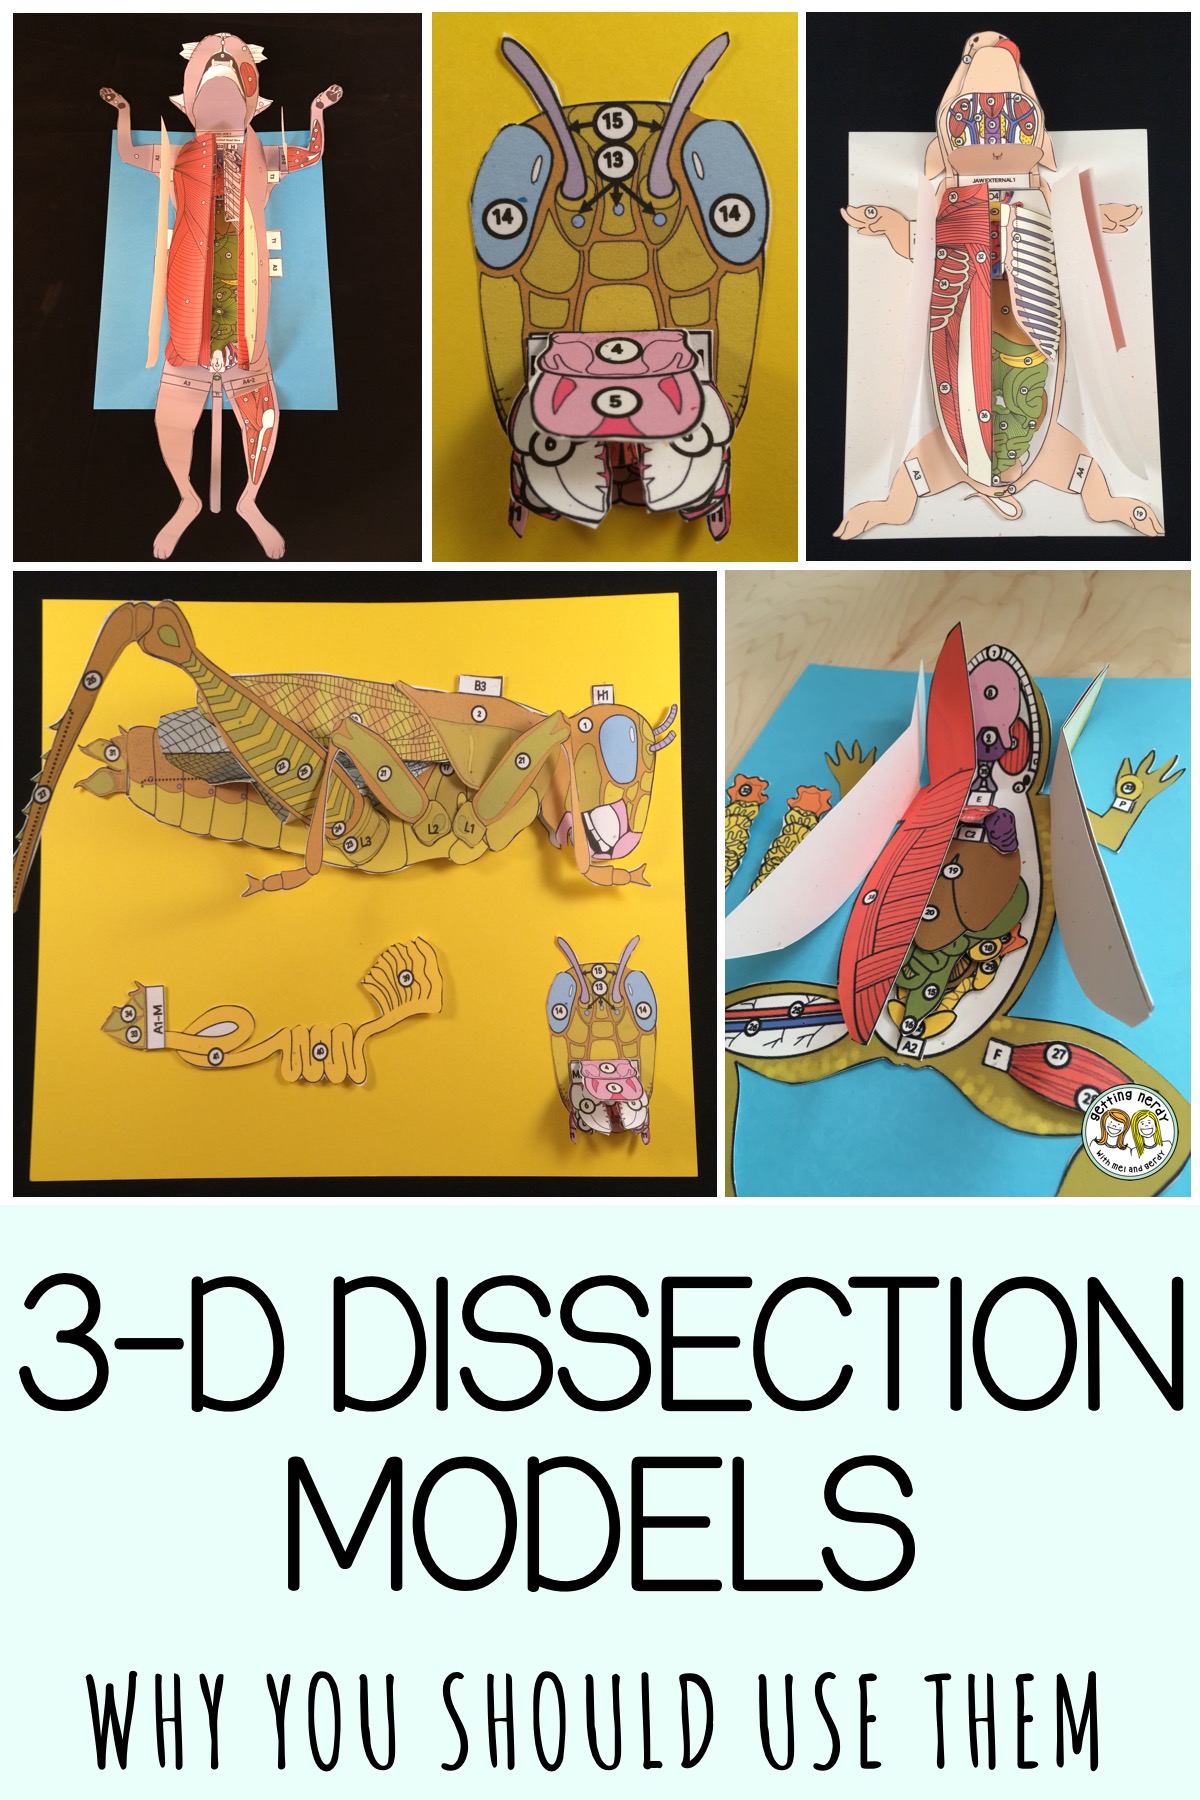 The Benefits of Paper 3D Dissection Models